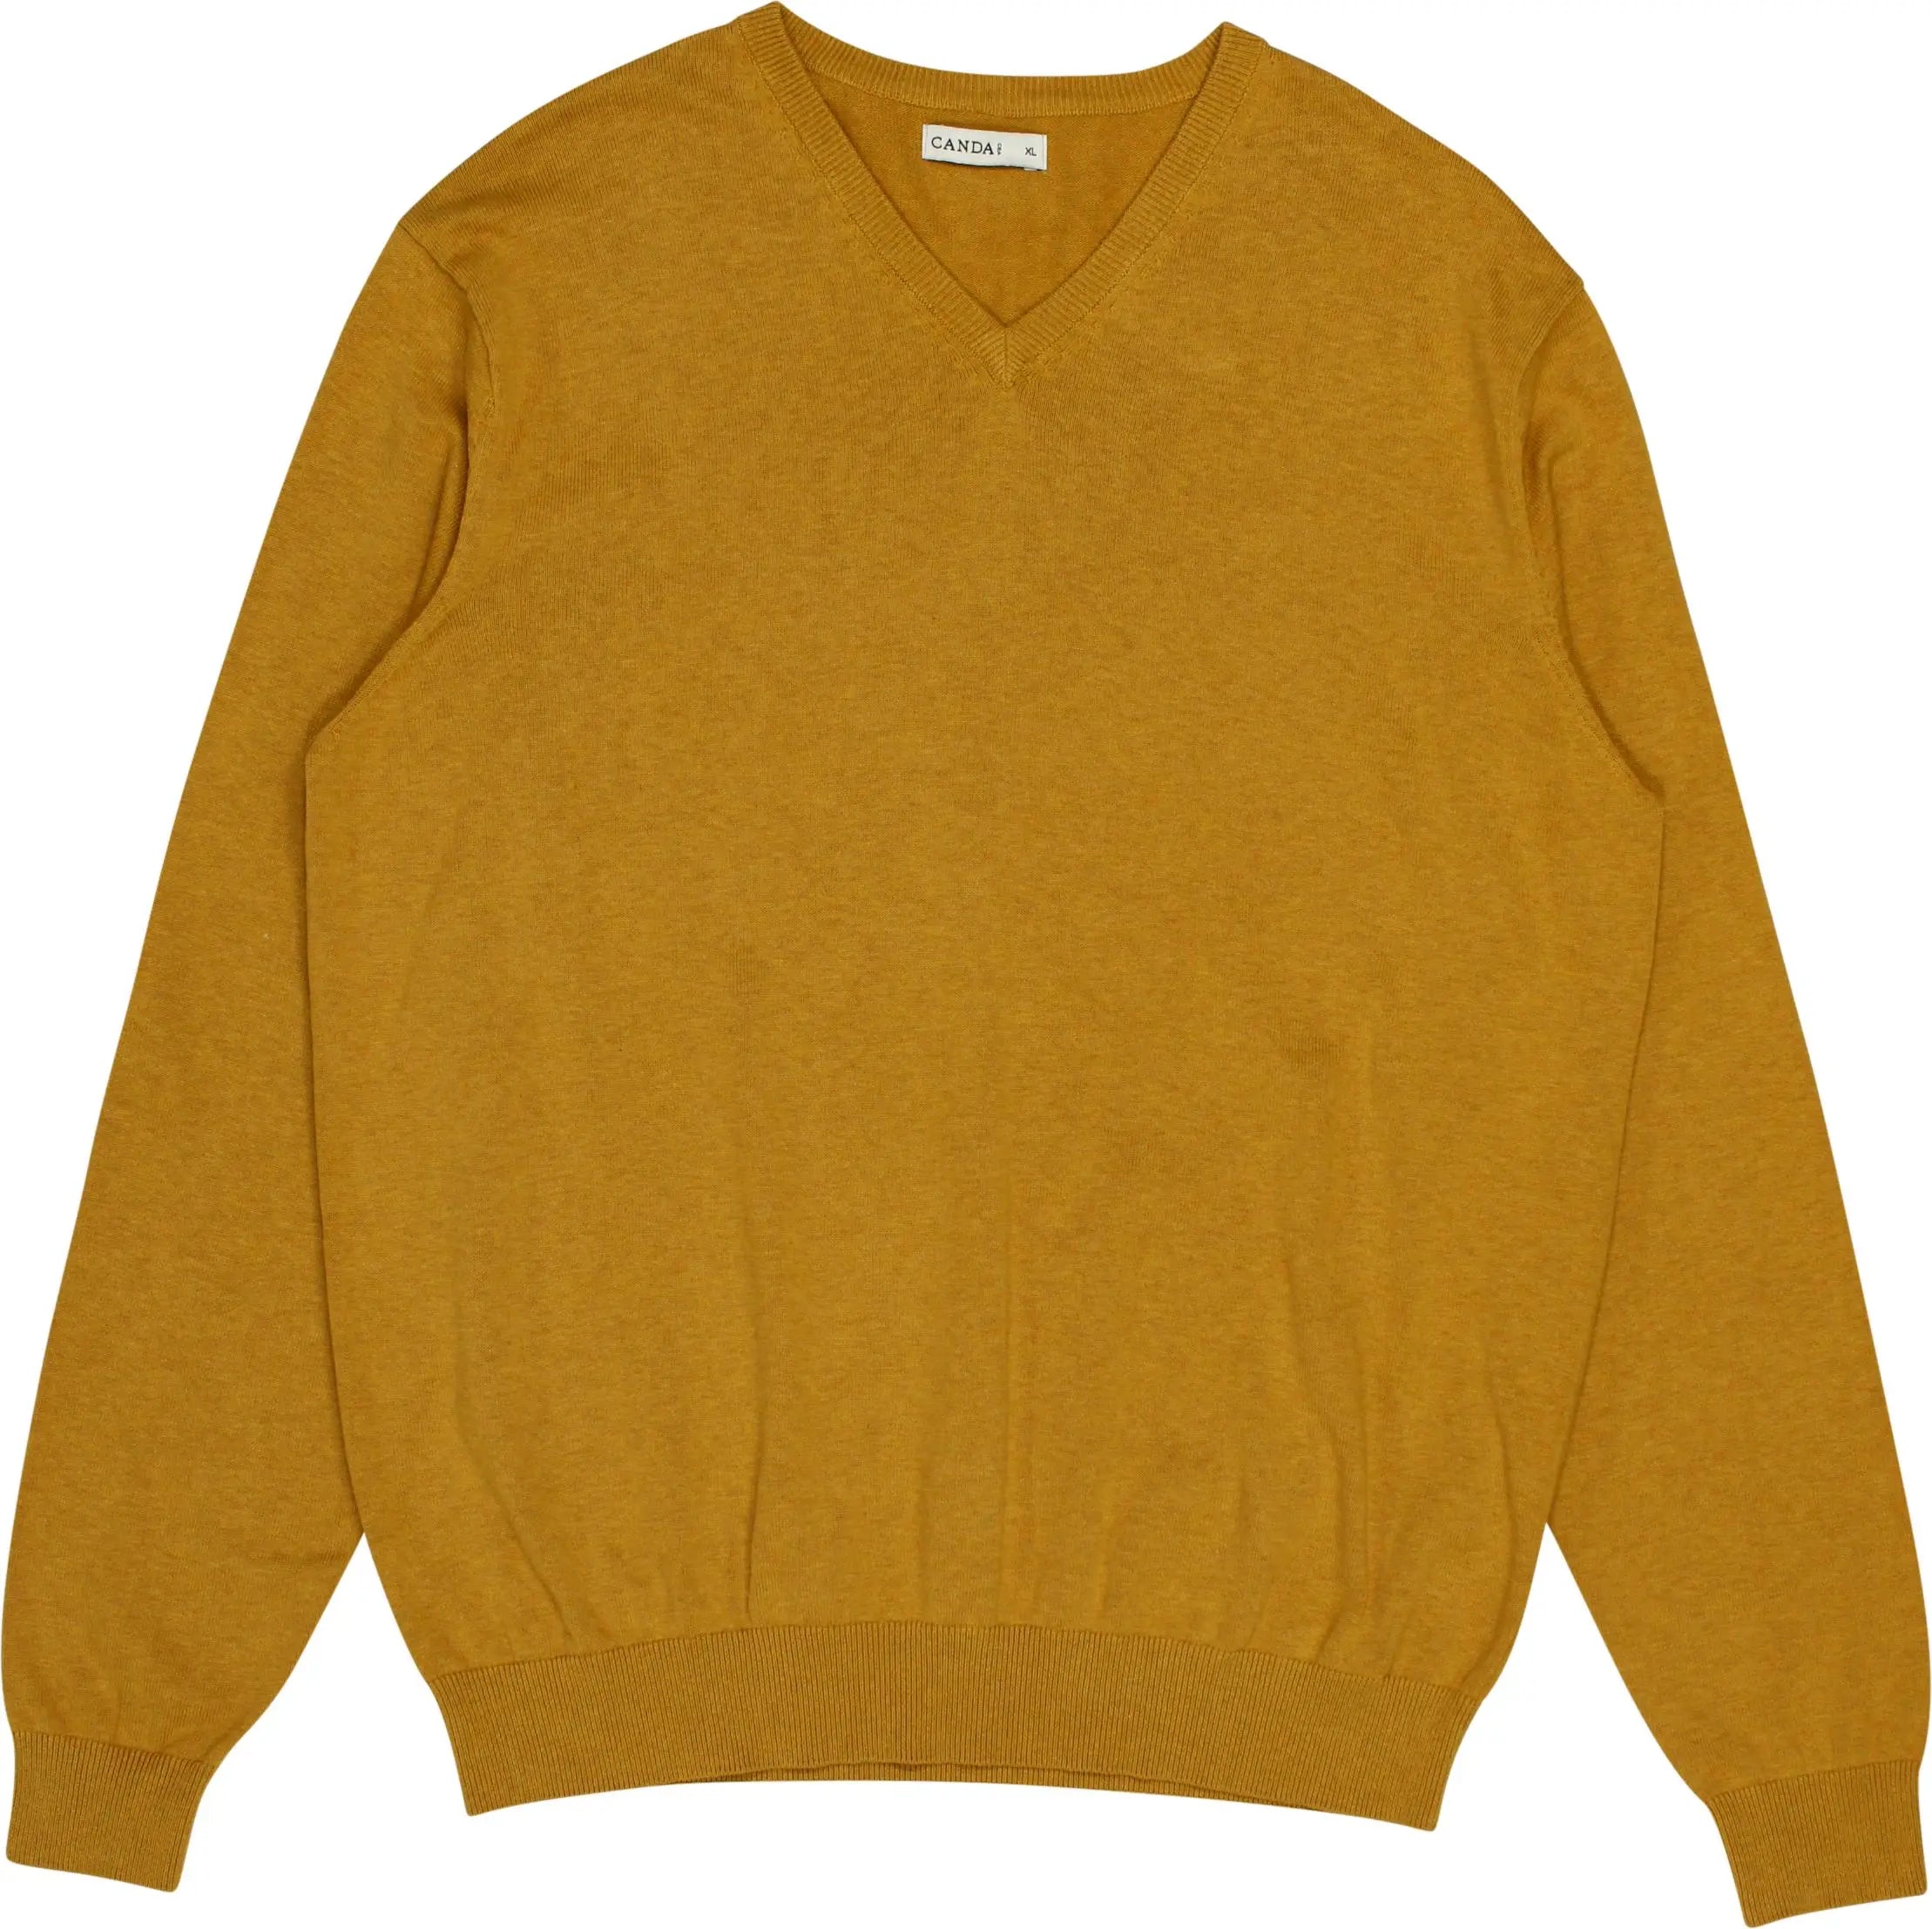 C&A - Yellow V-Neck Jumper- ThriftTale.com - Vintage and second handclothing